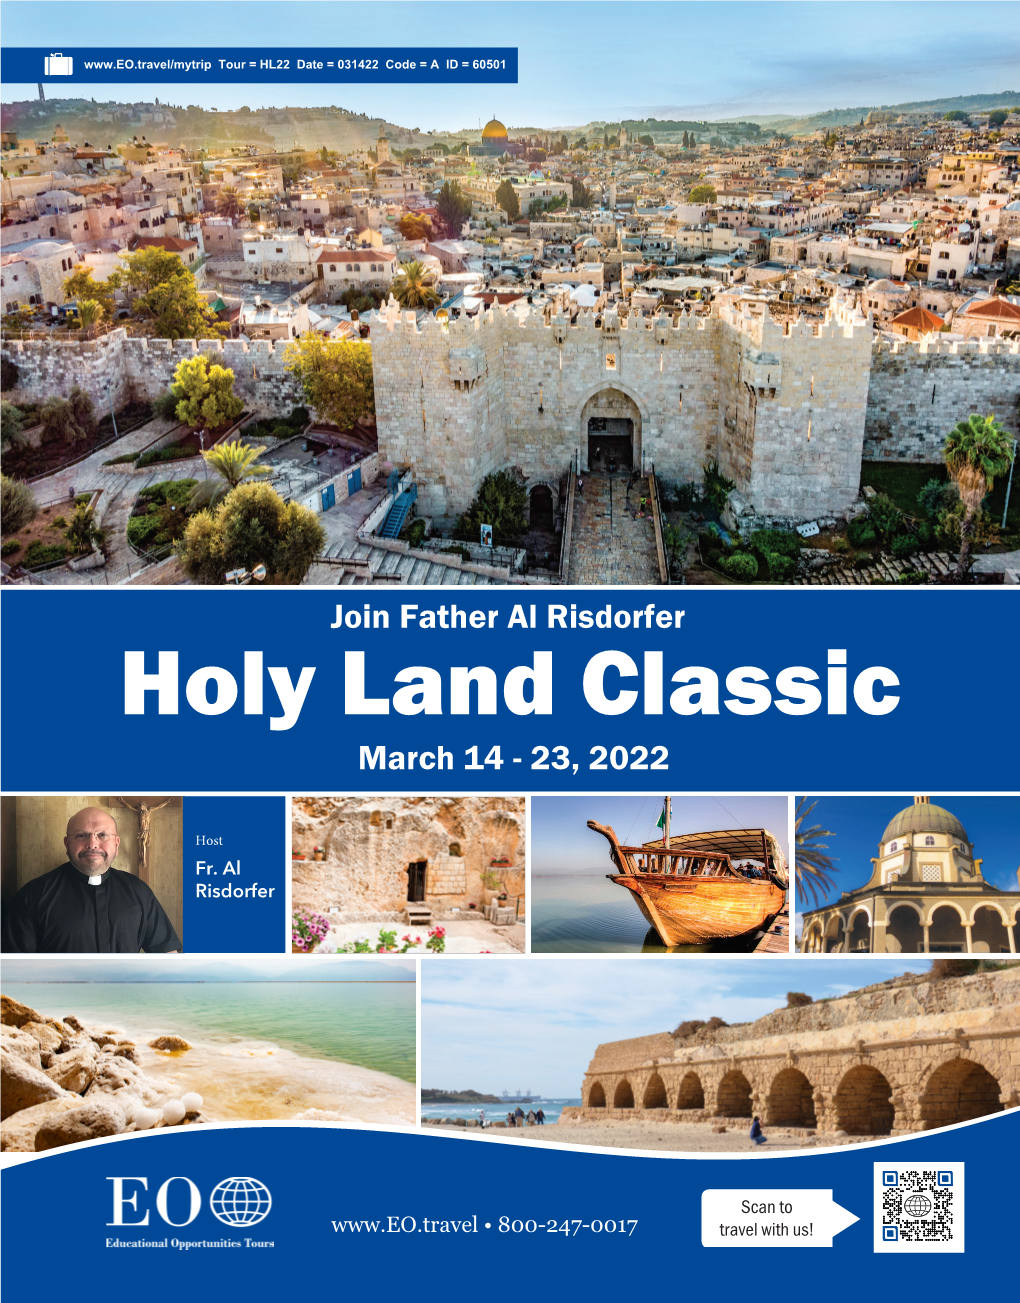 Holy Land Classic March 14 - 23, 2022